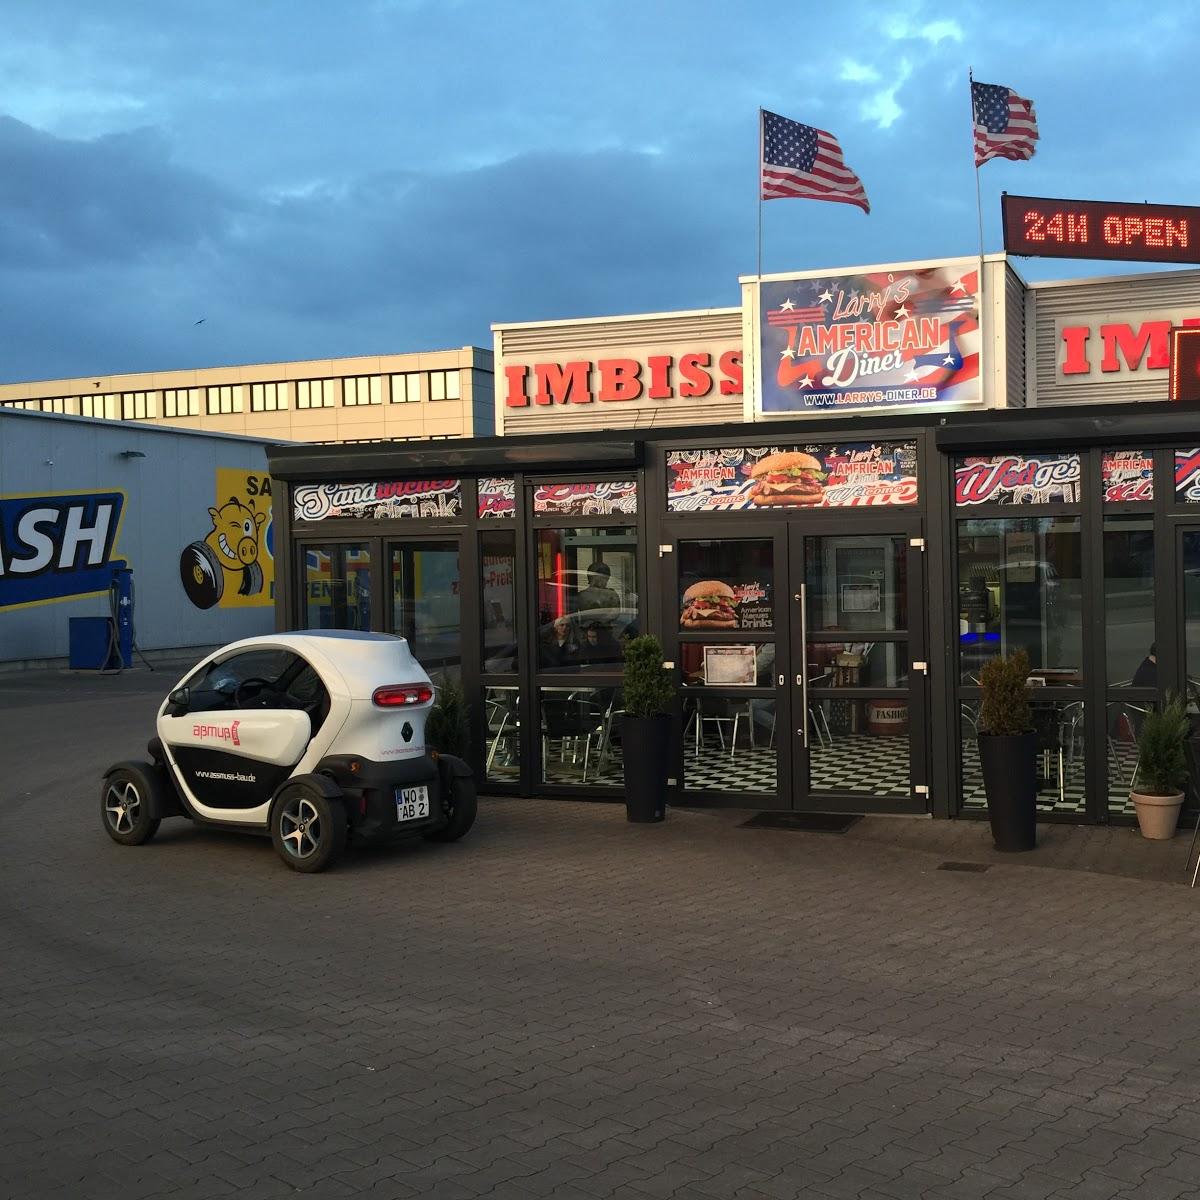 Restaurant "Larry´s American Diner" in Worms